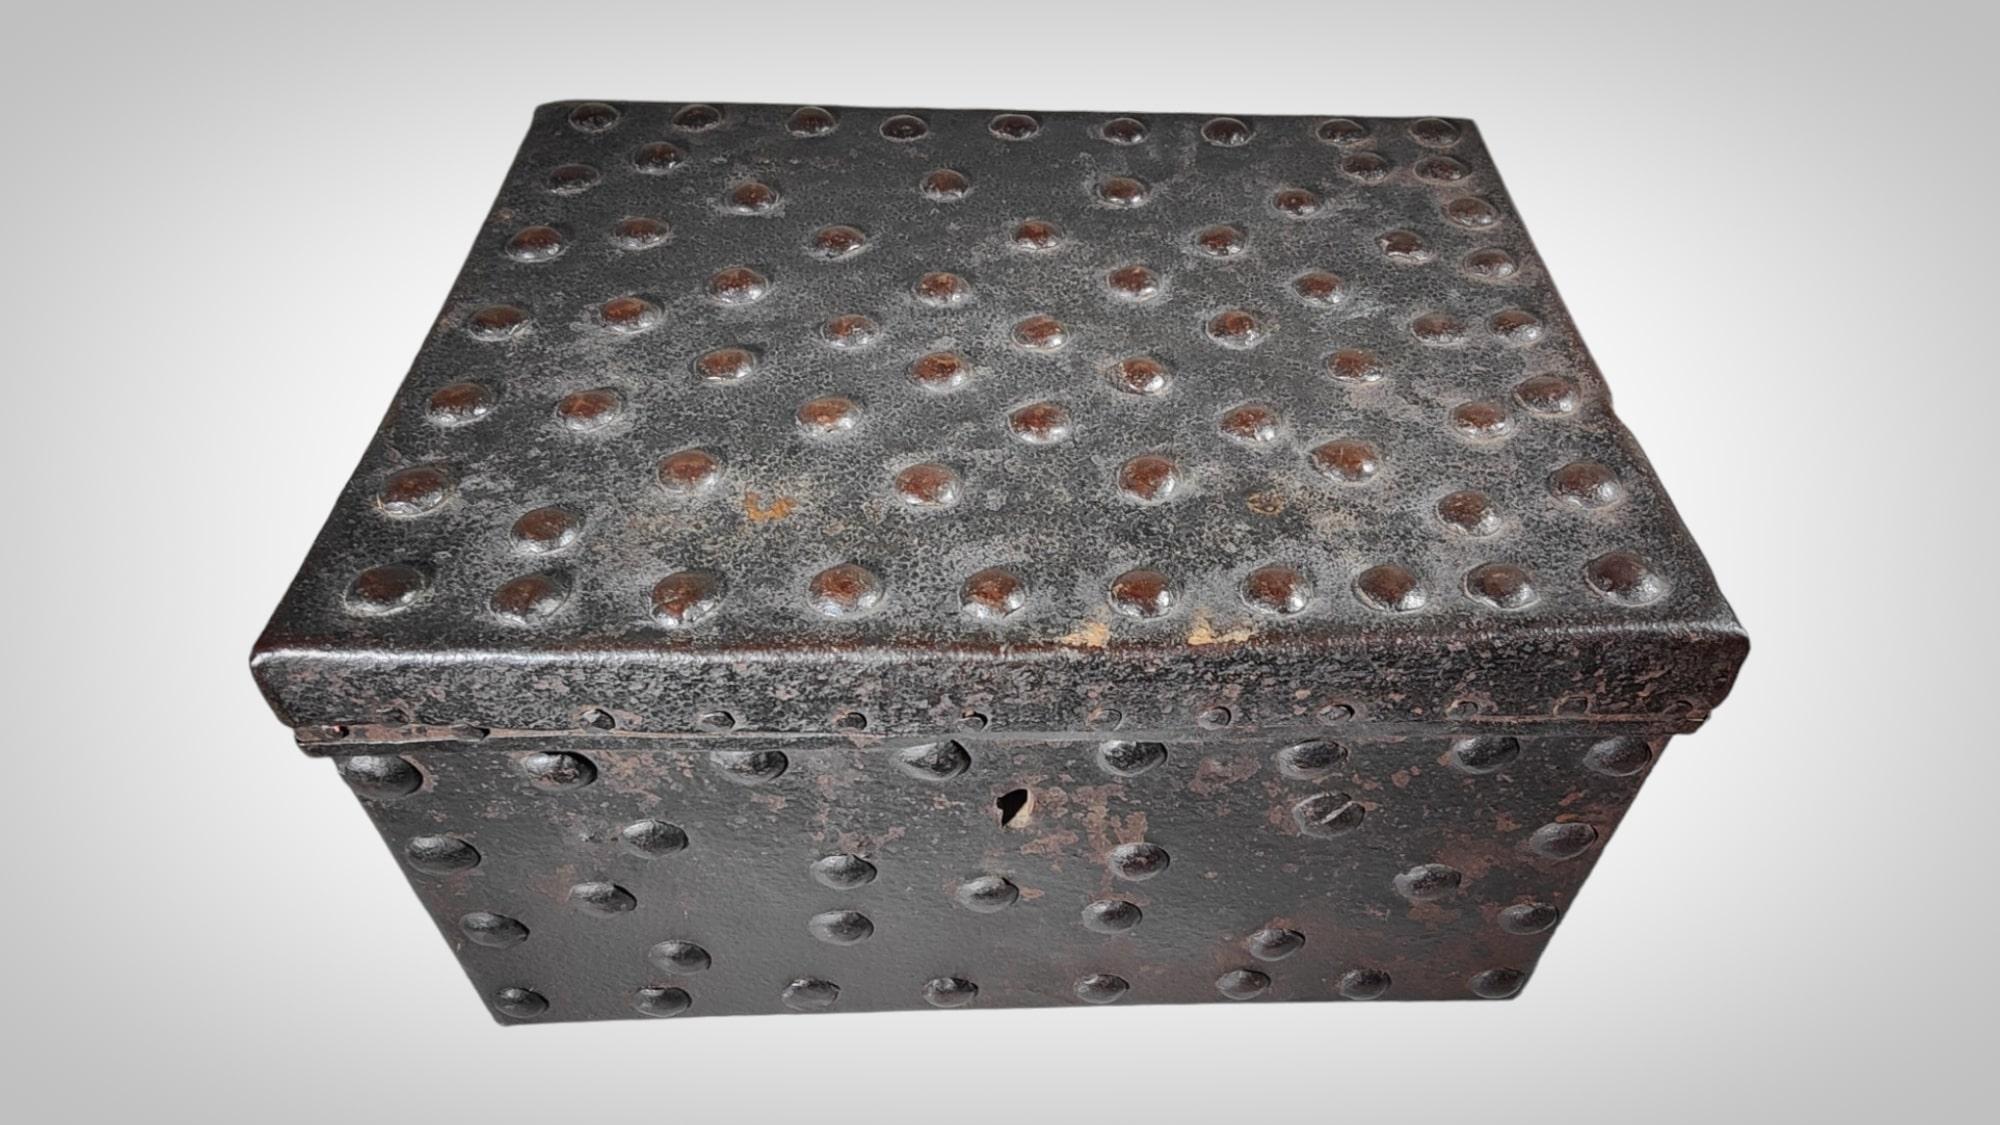 Wrought iron box with secret 18th century
Riveted wrought iron box. One of the rivets moves upwards and makes an internal mechanism move in order to open. The mechanism is incomplete. 18th century. Measurements: 35x25x17 cm